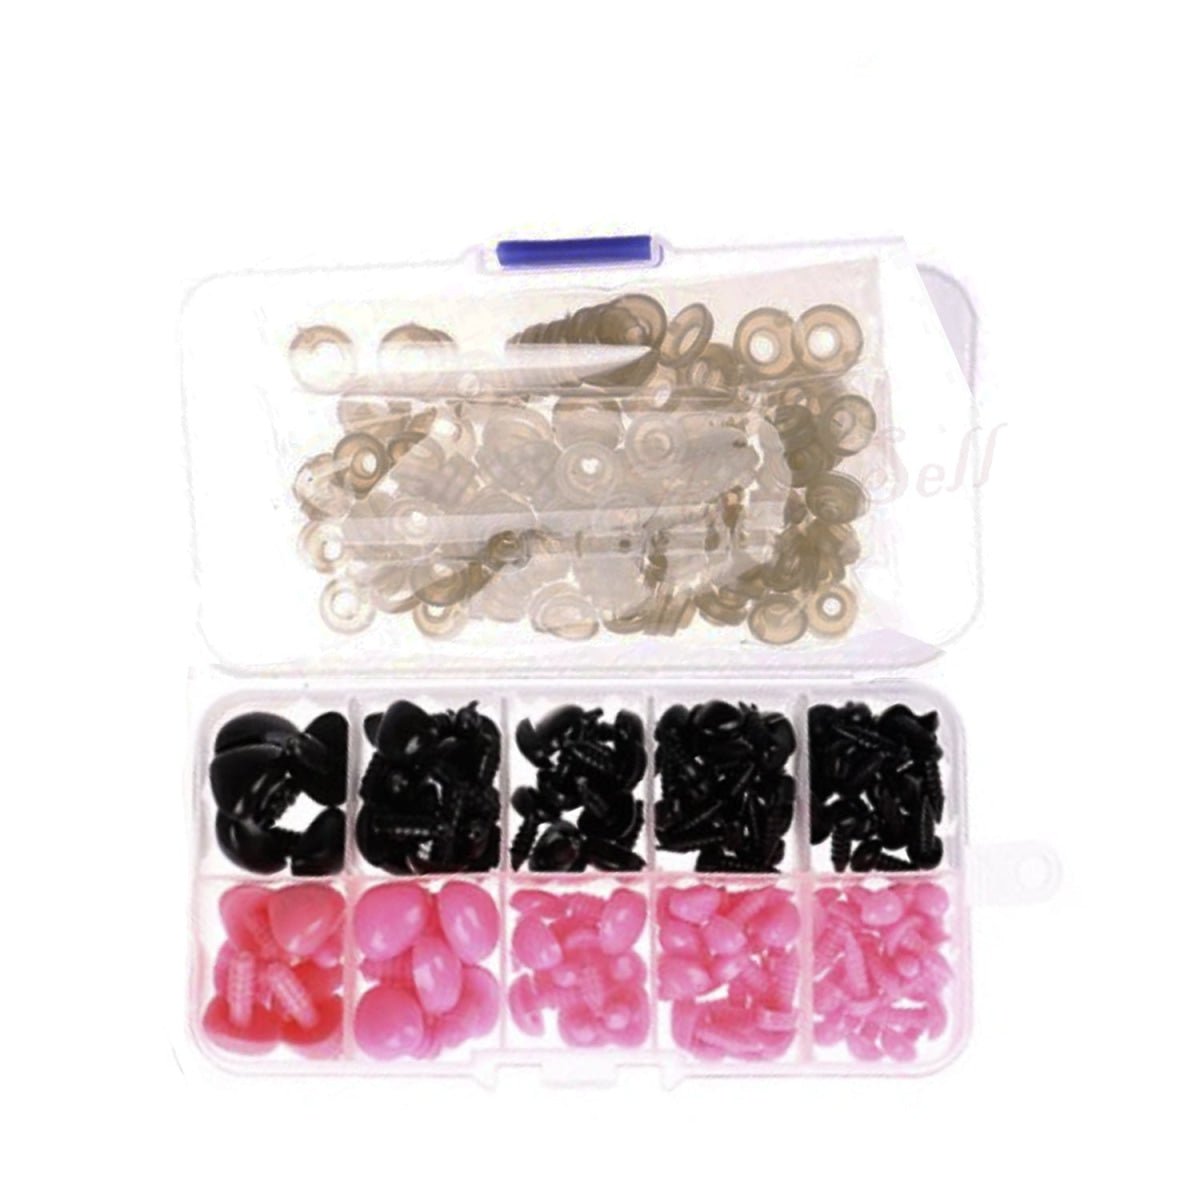 130pcs Set Plastic Toy Noses Triangle Nose Black Brown Pink Screw Backing Bear Puppet Dolls Toy - Black and Pink - - Asia Sell